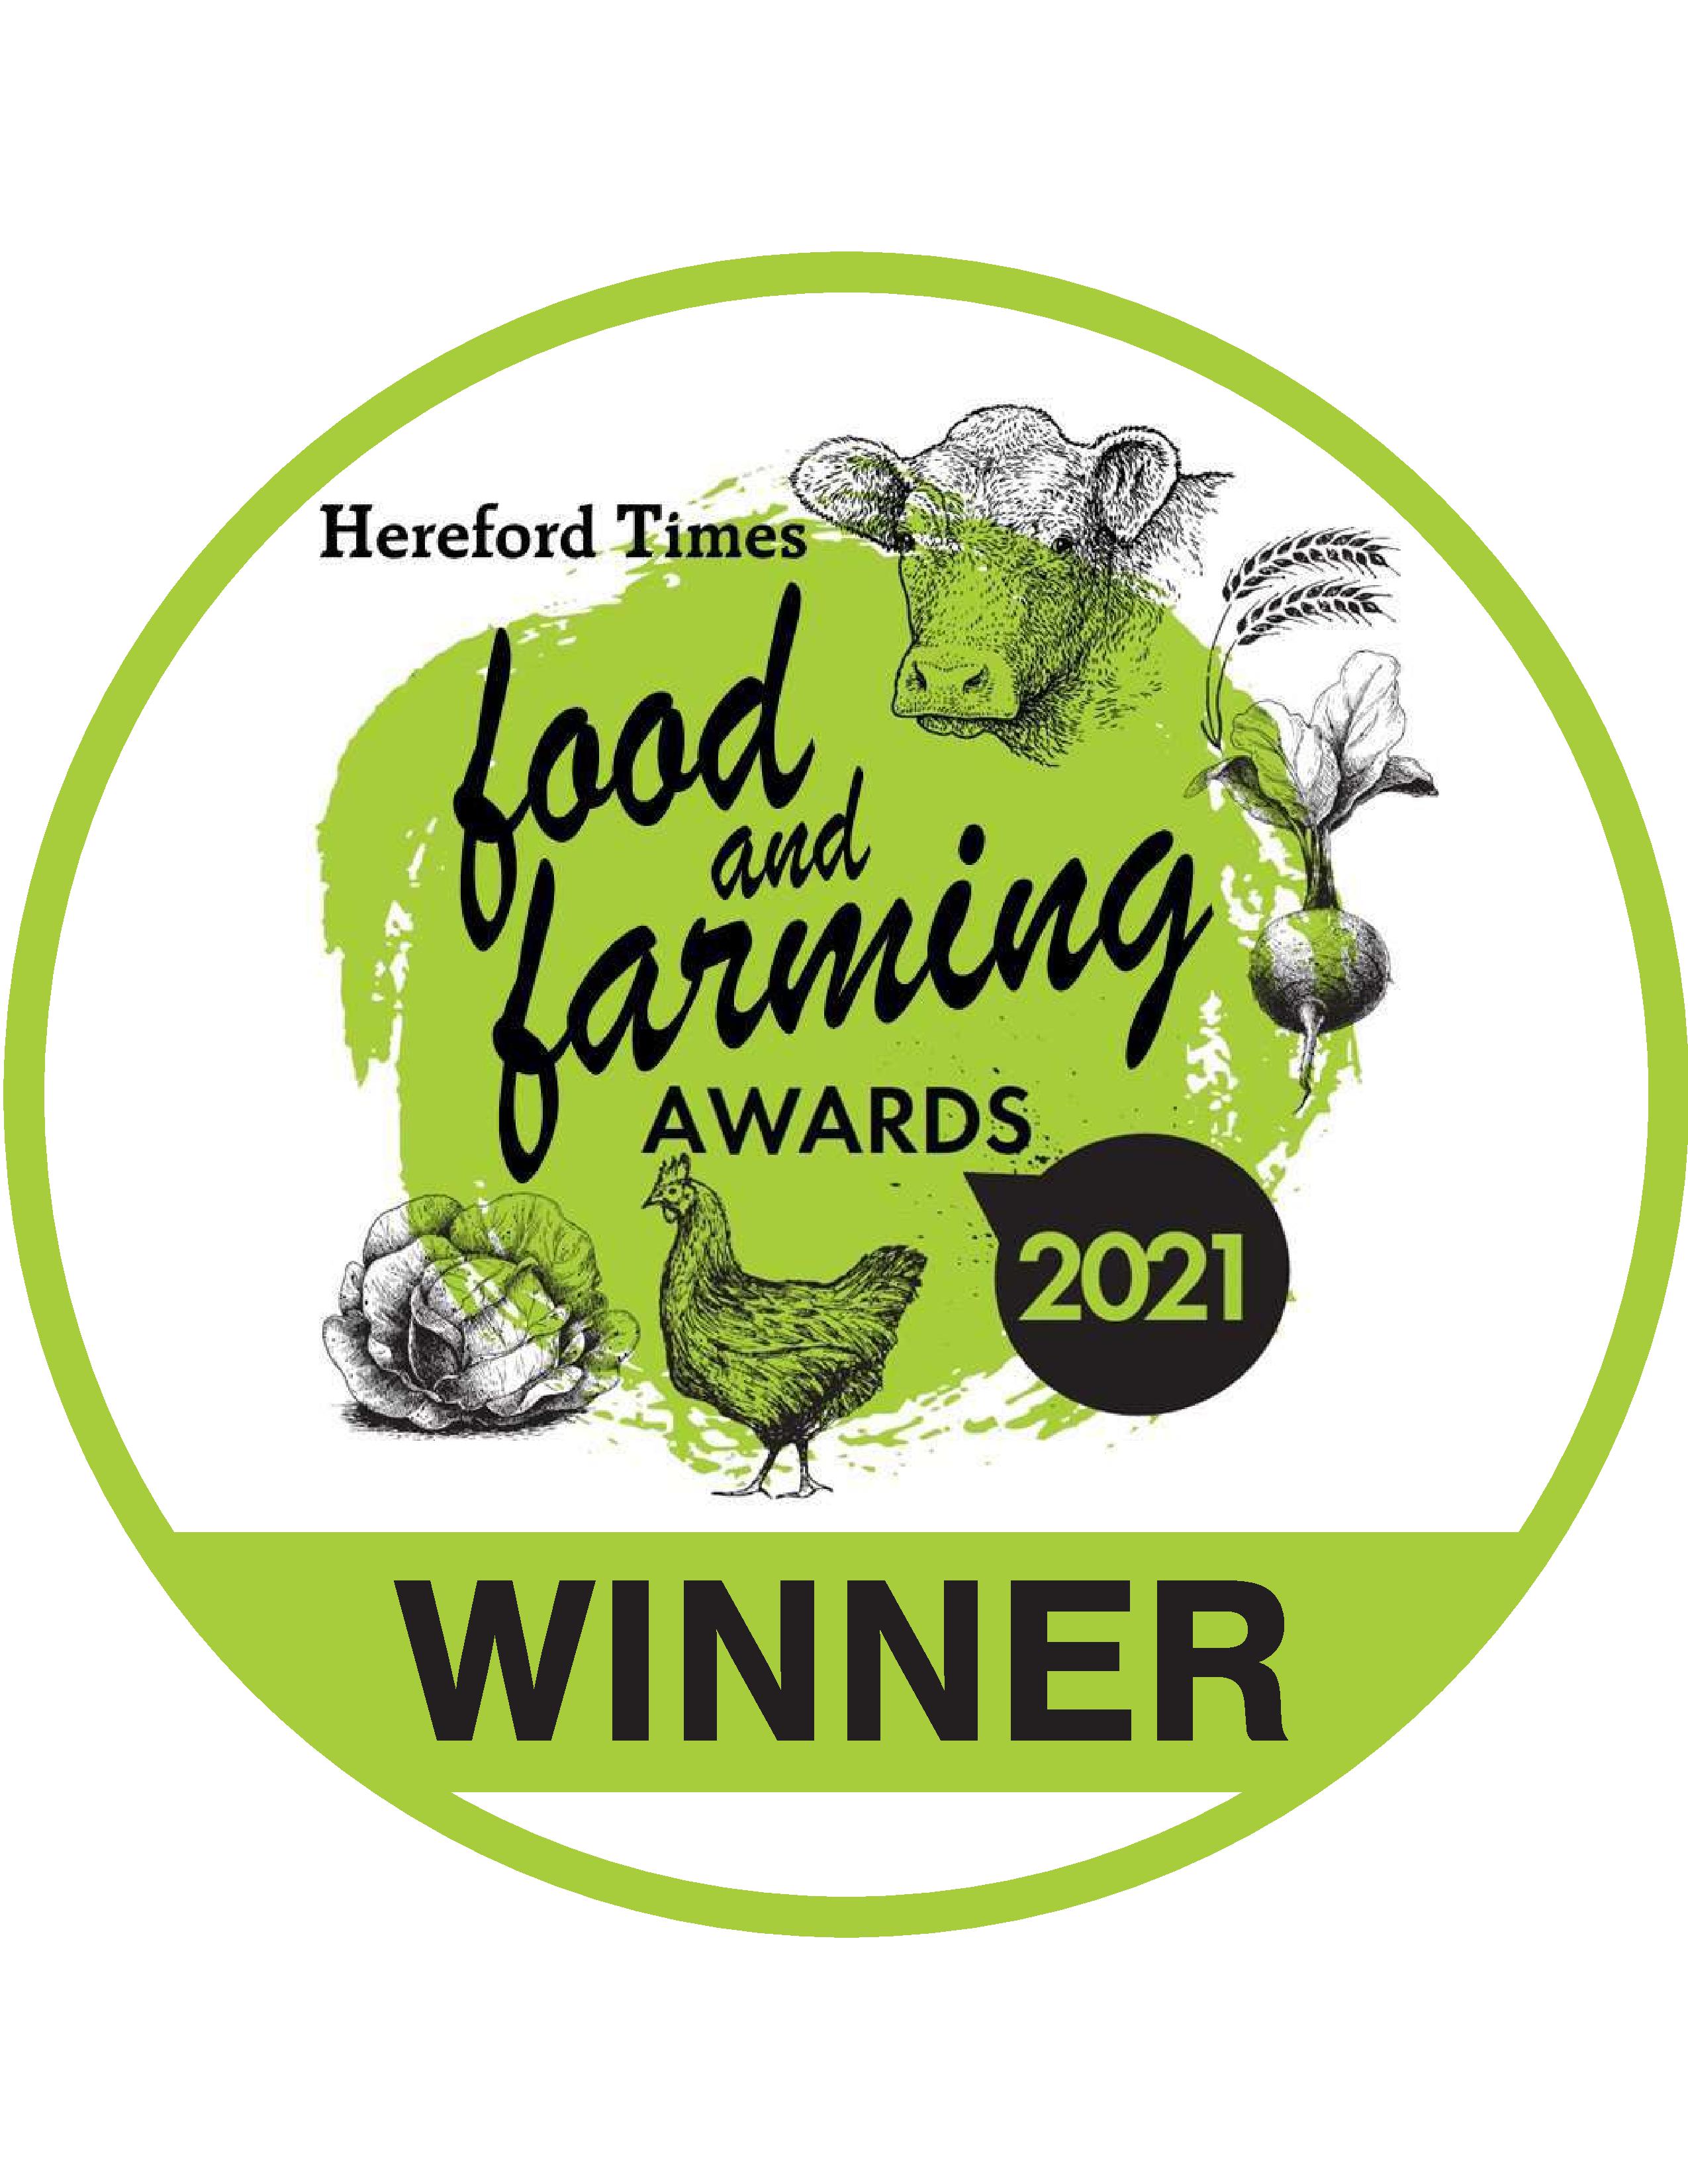 Hereford Times Food and Farming awards winner